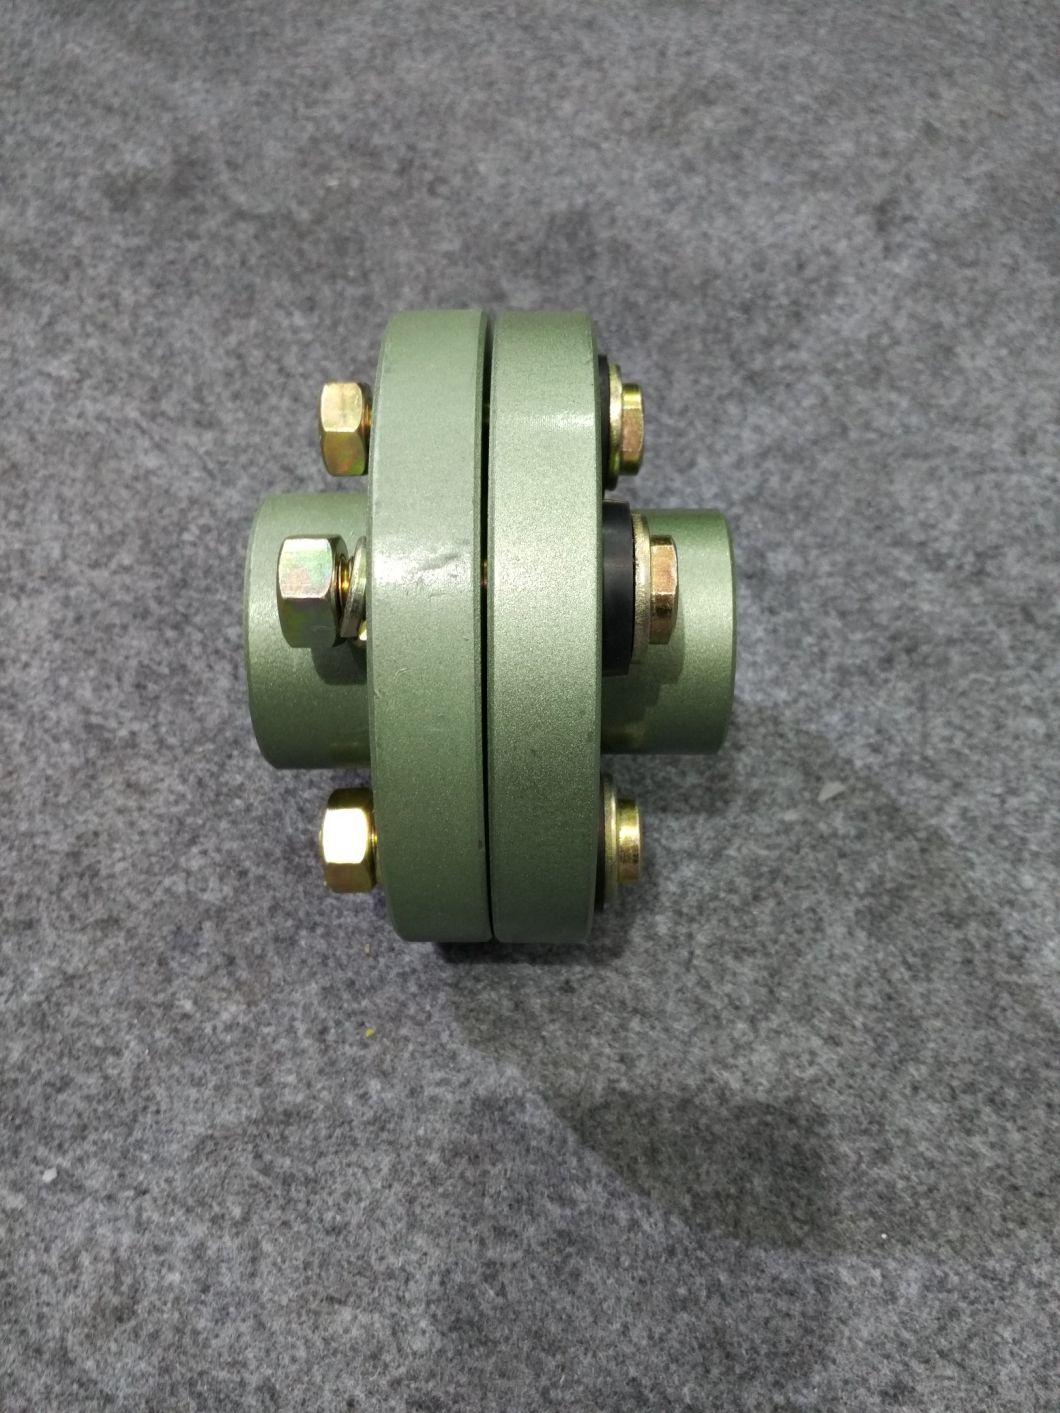 Best and High Quality Mechanical FCL 90 100 112 125 140 160 180 200 Flexible Couplings/Pin Bush Coupling